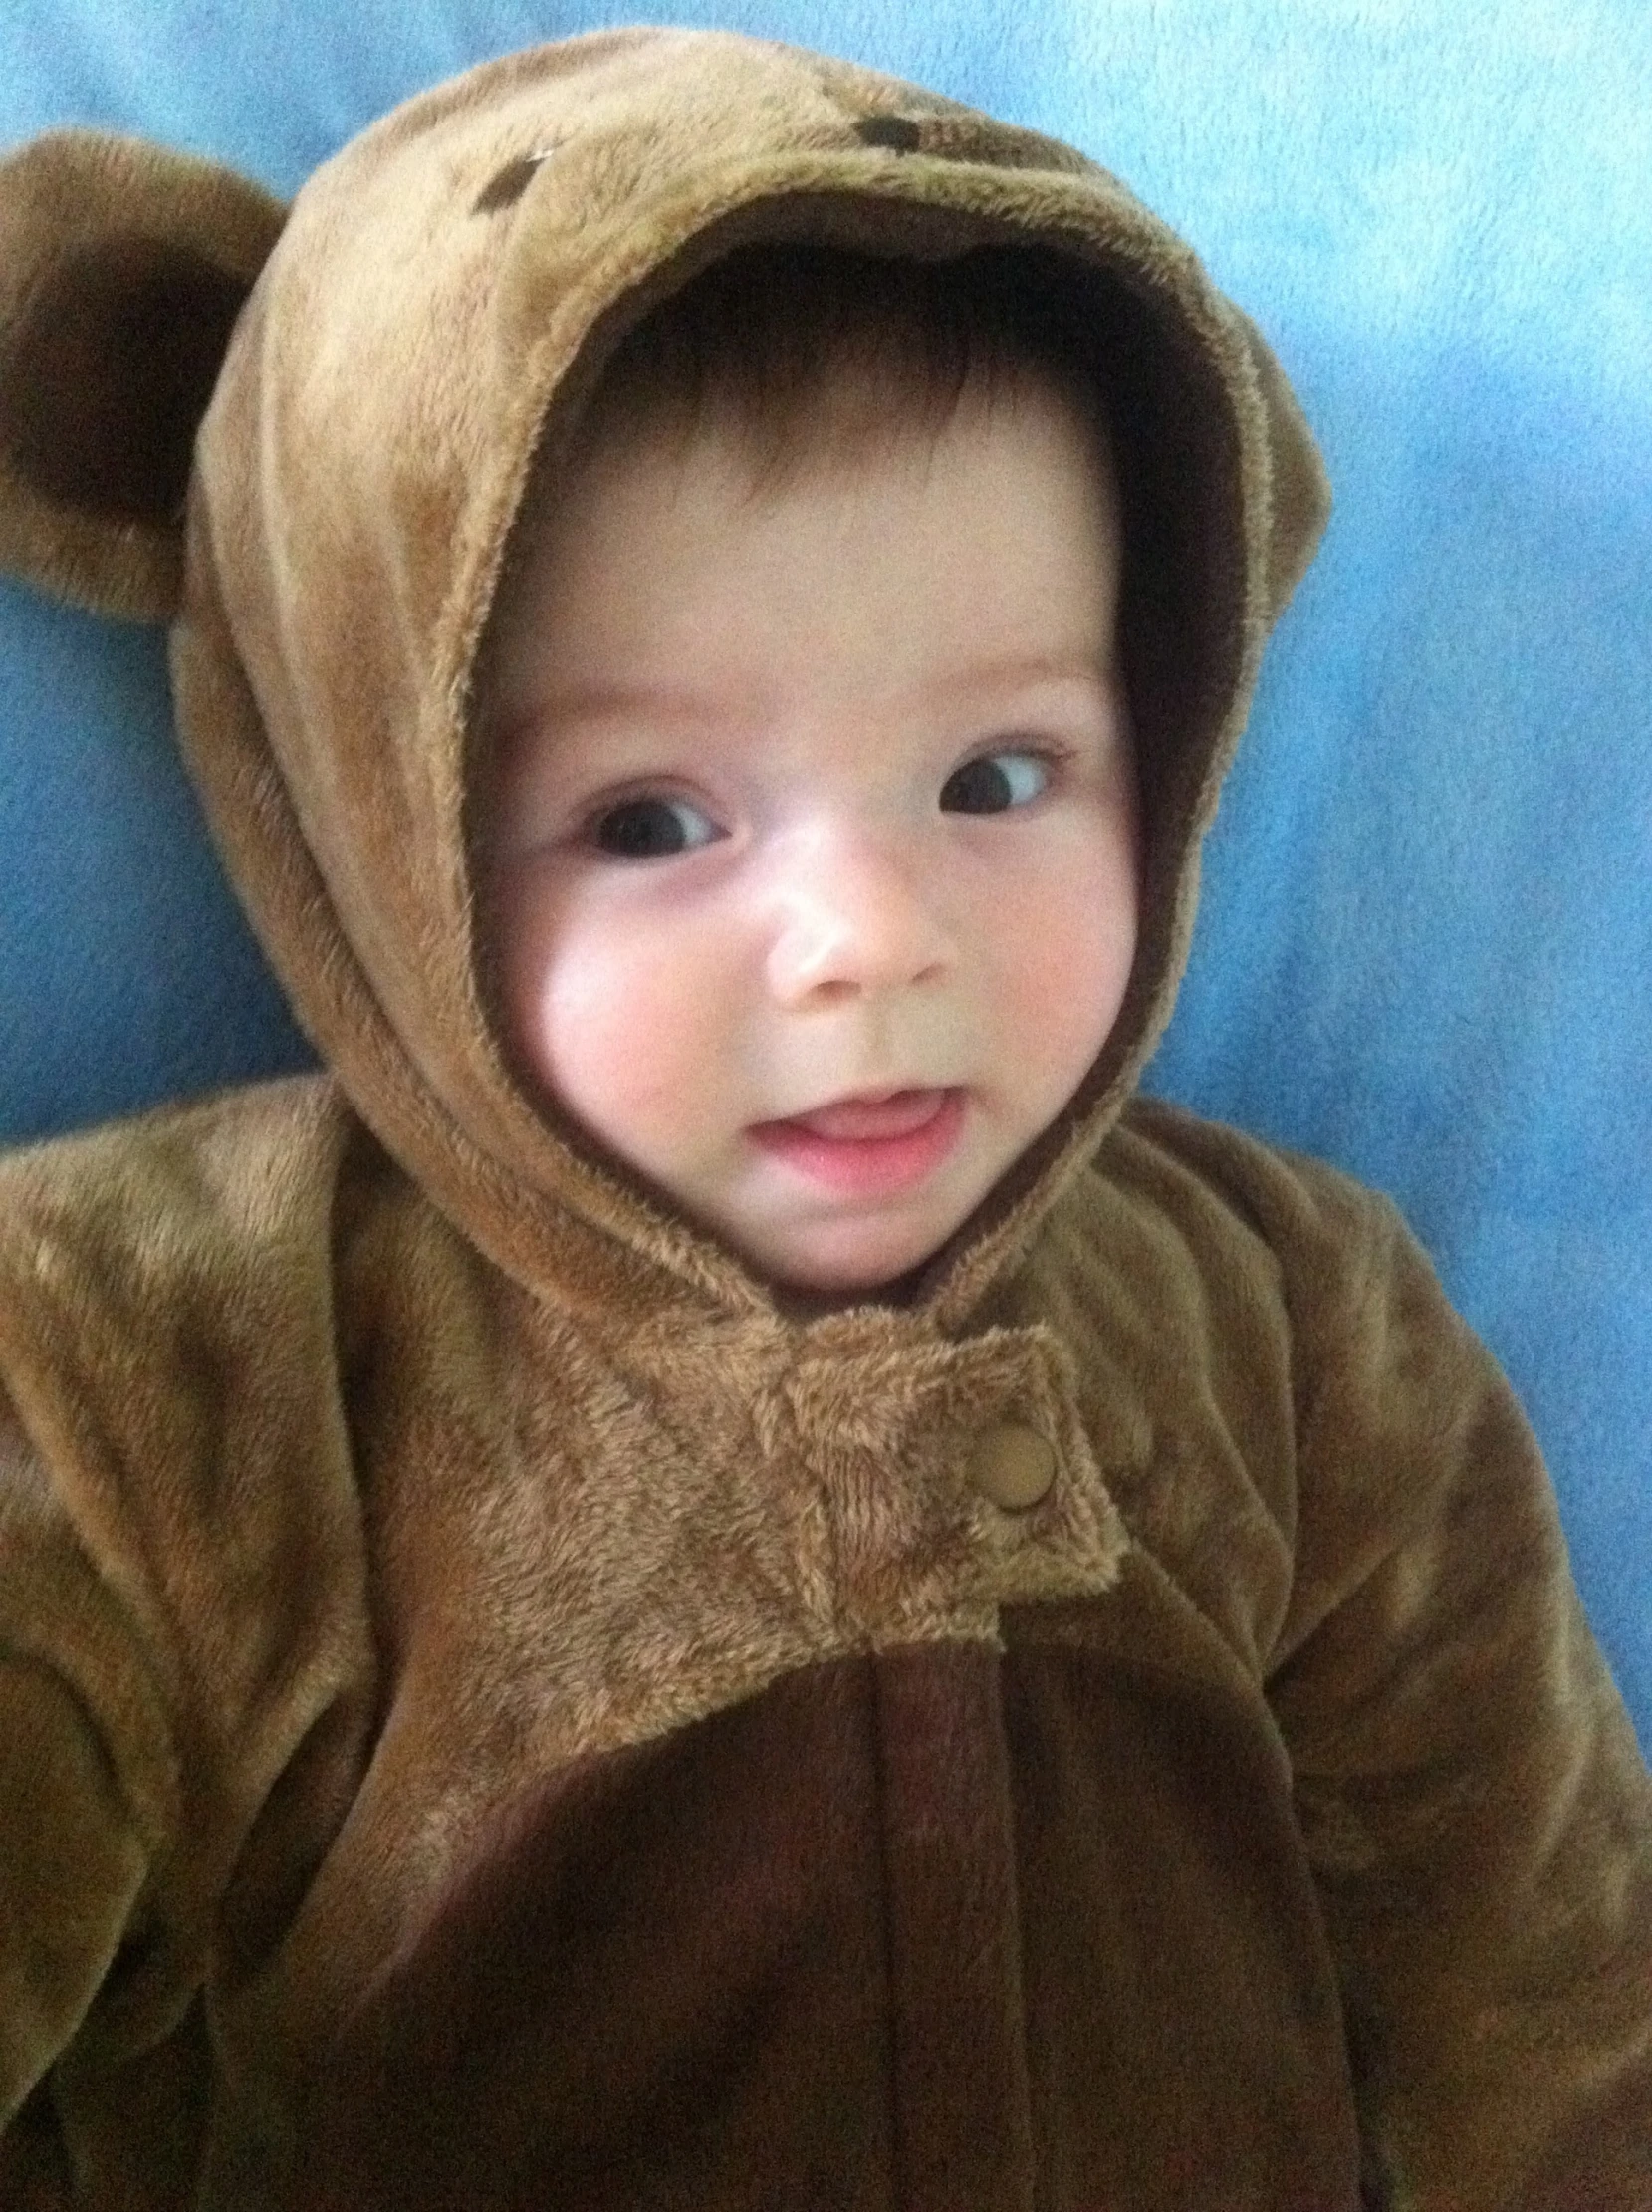 small child with hooded brown bear outfit sitting on bed